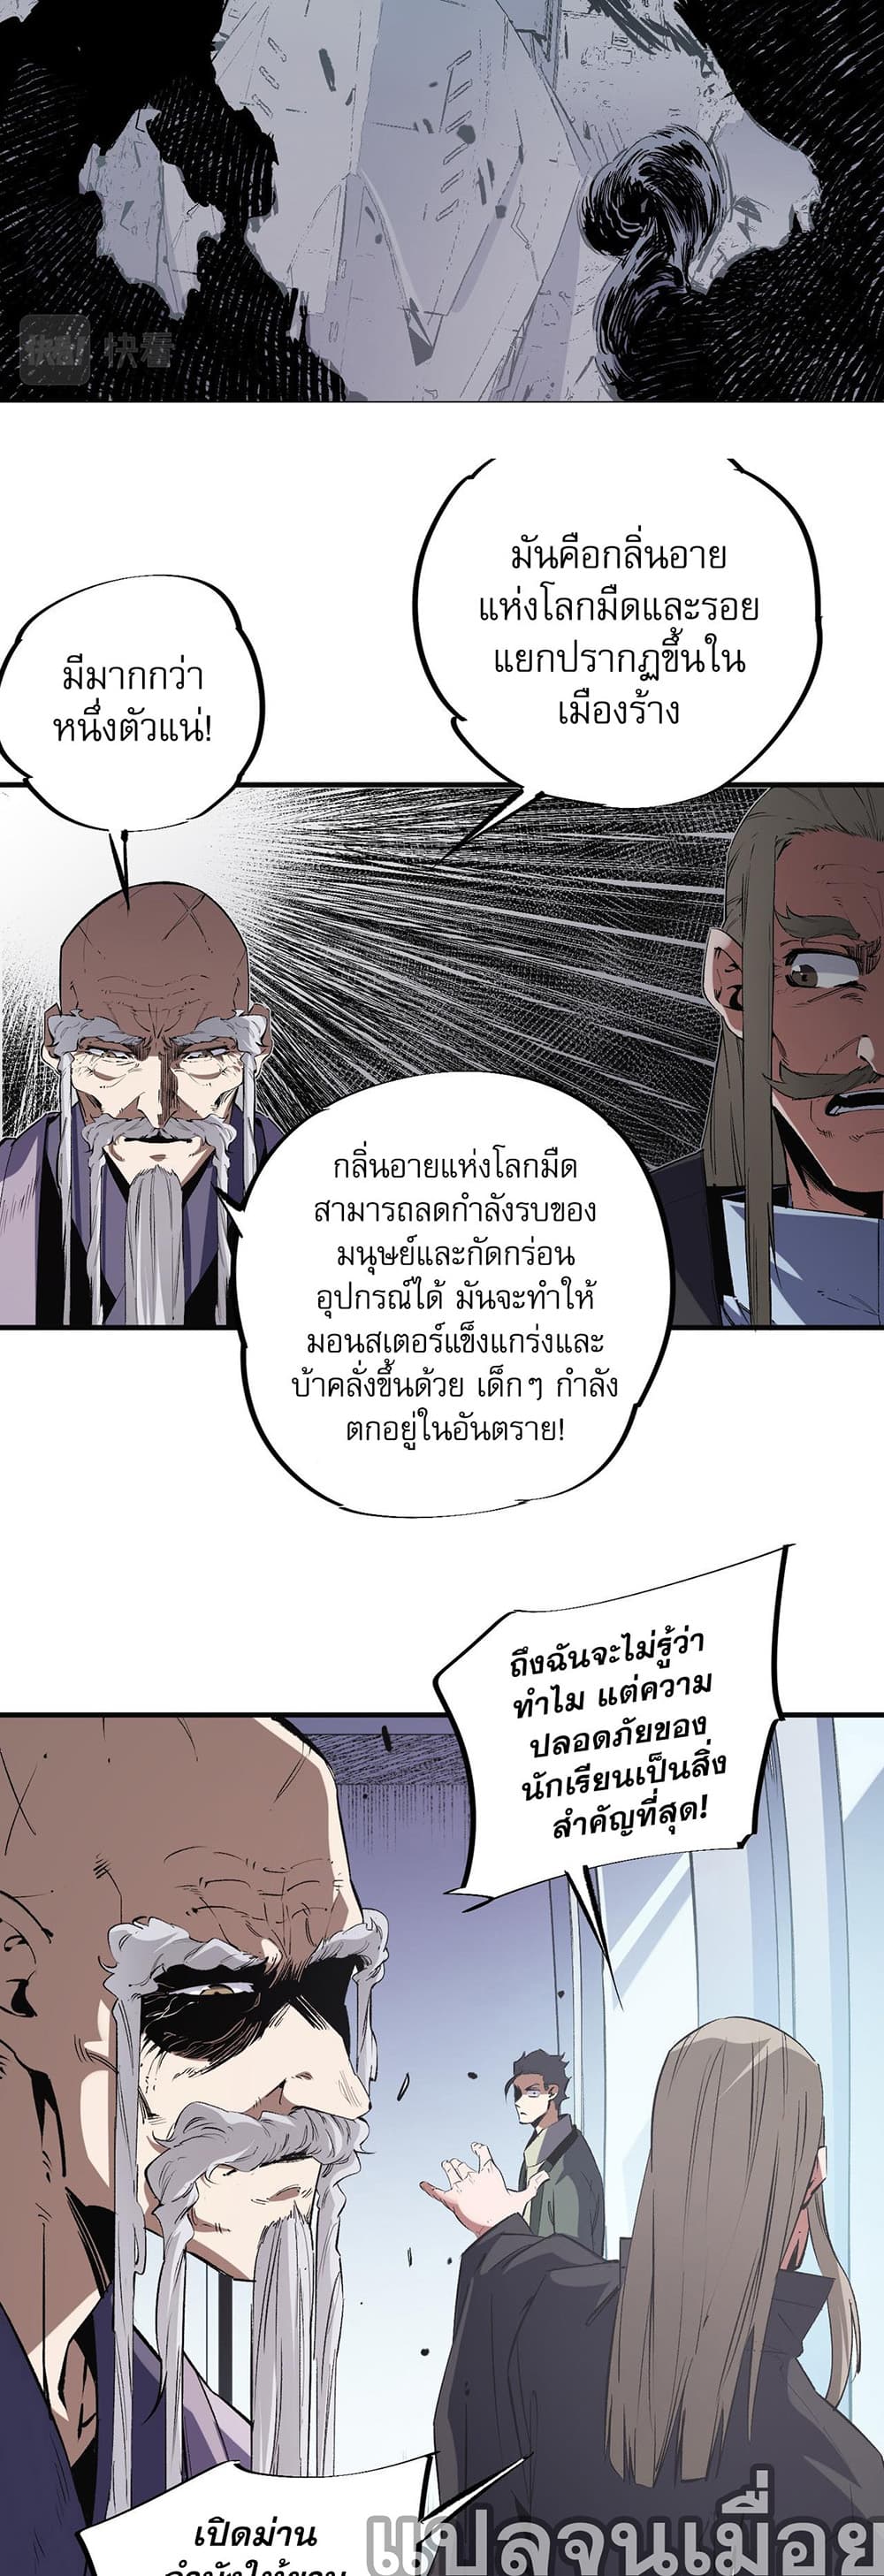 Job Changing for the Entire Population: The Jobless Me Will Terminate the Gods ฉันคือผู้เล่นไร้อาชีพที่สังหารเหล่าเทพ 41-41